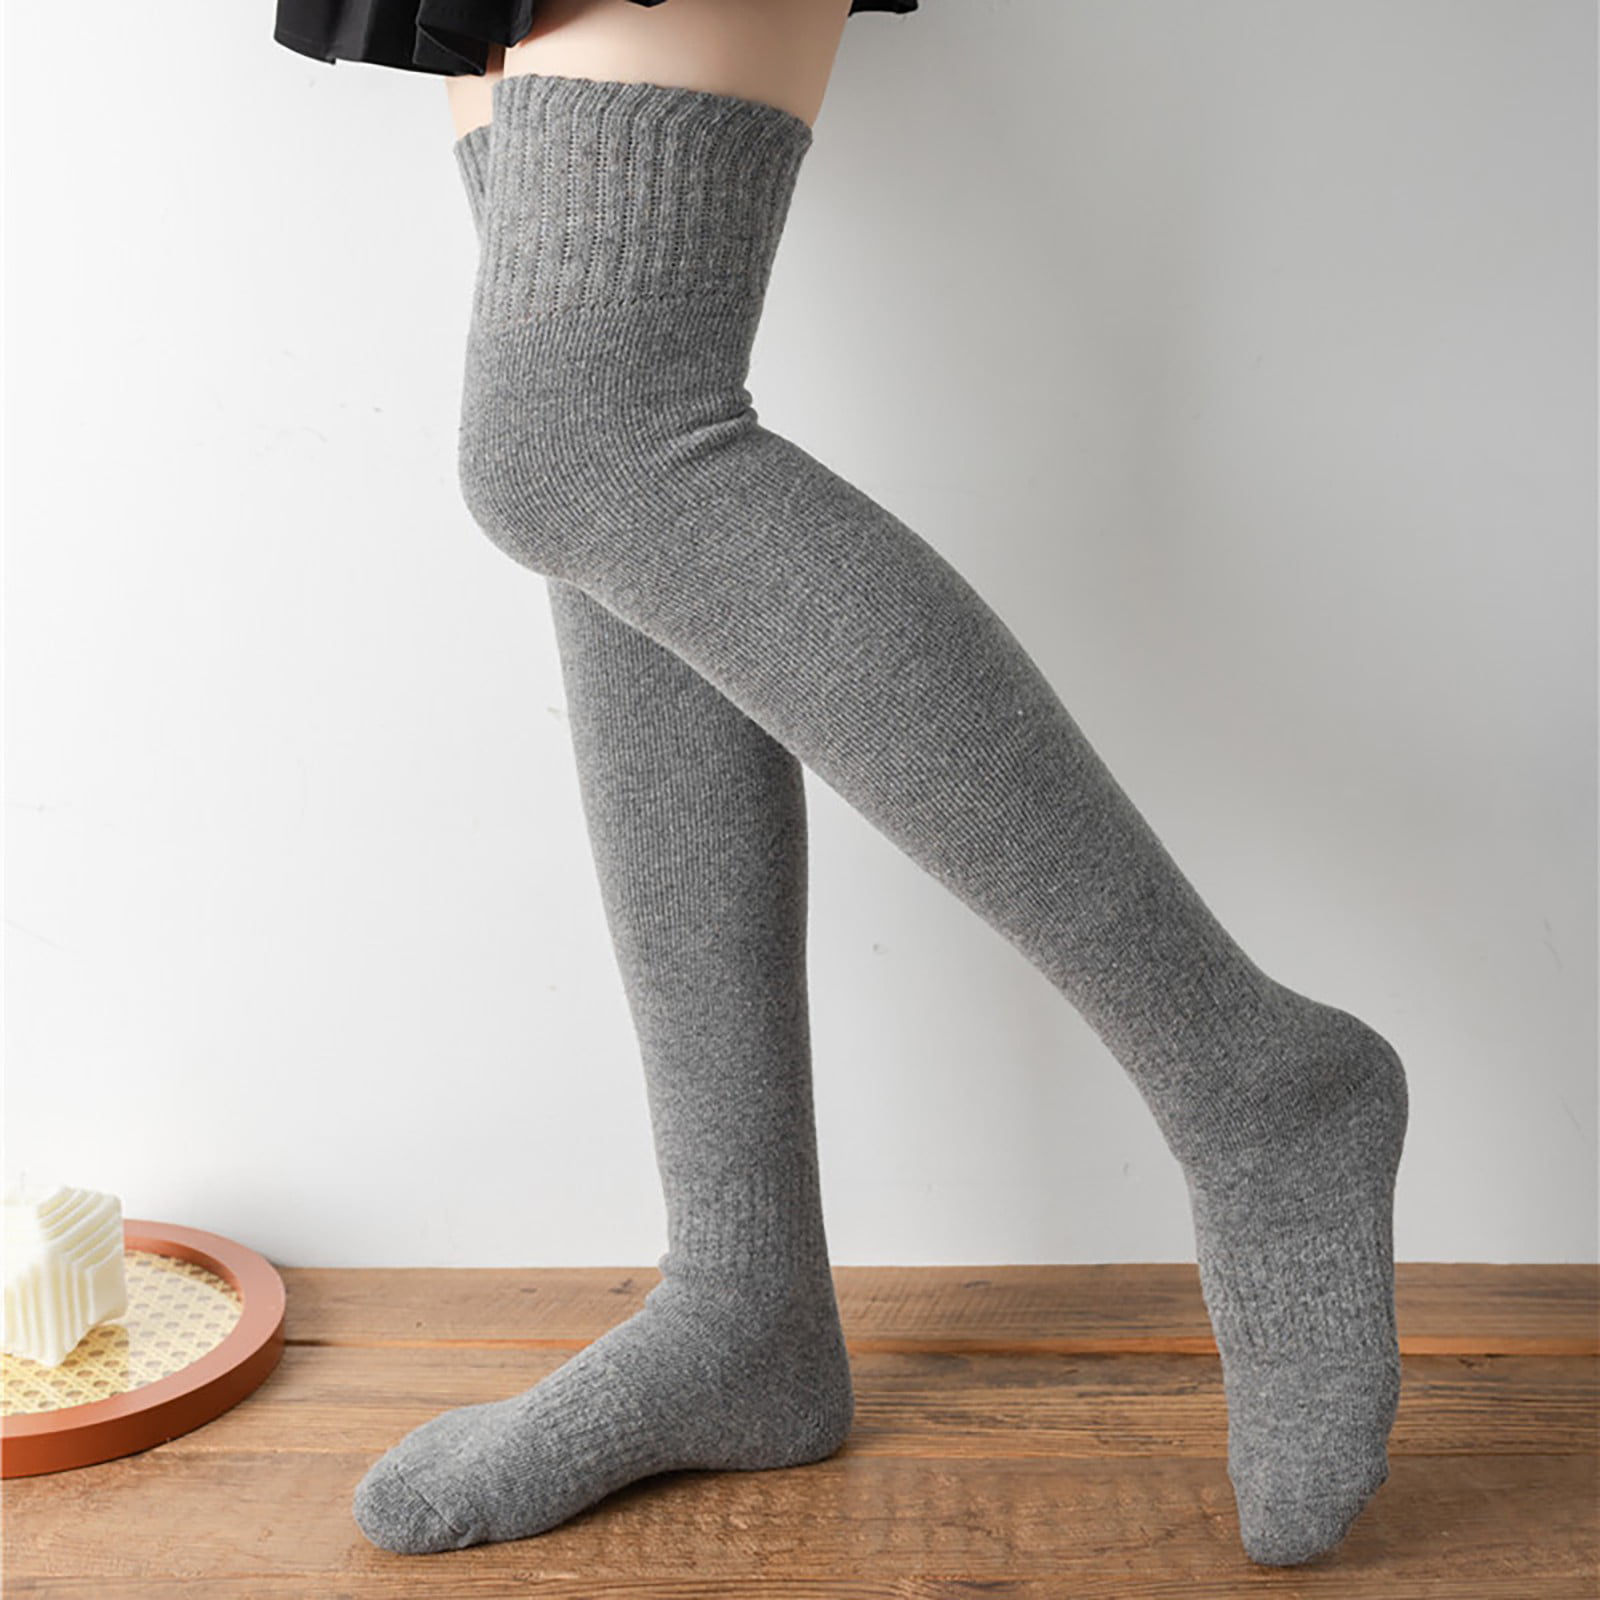 The Best Tights and Socks For Fall and Winter - 50 IS NOT OLD - A